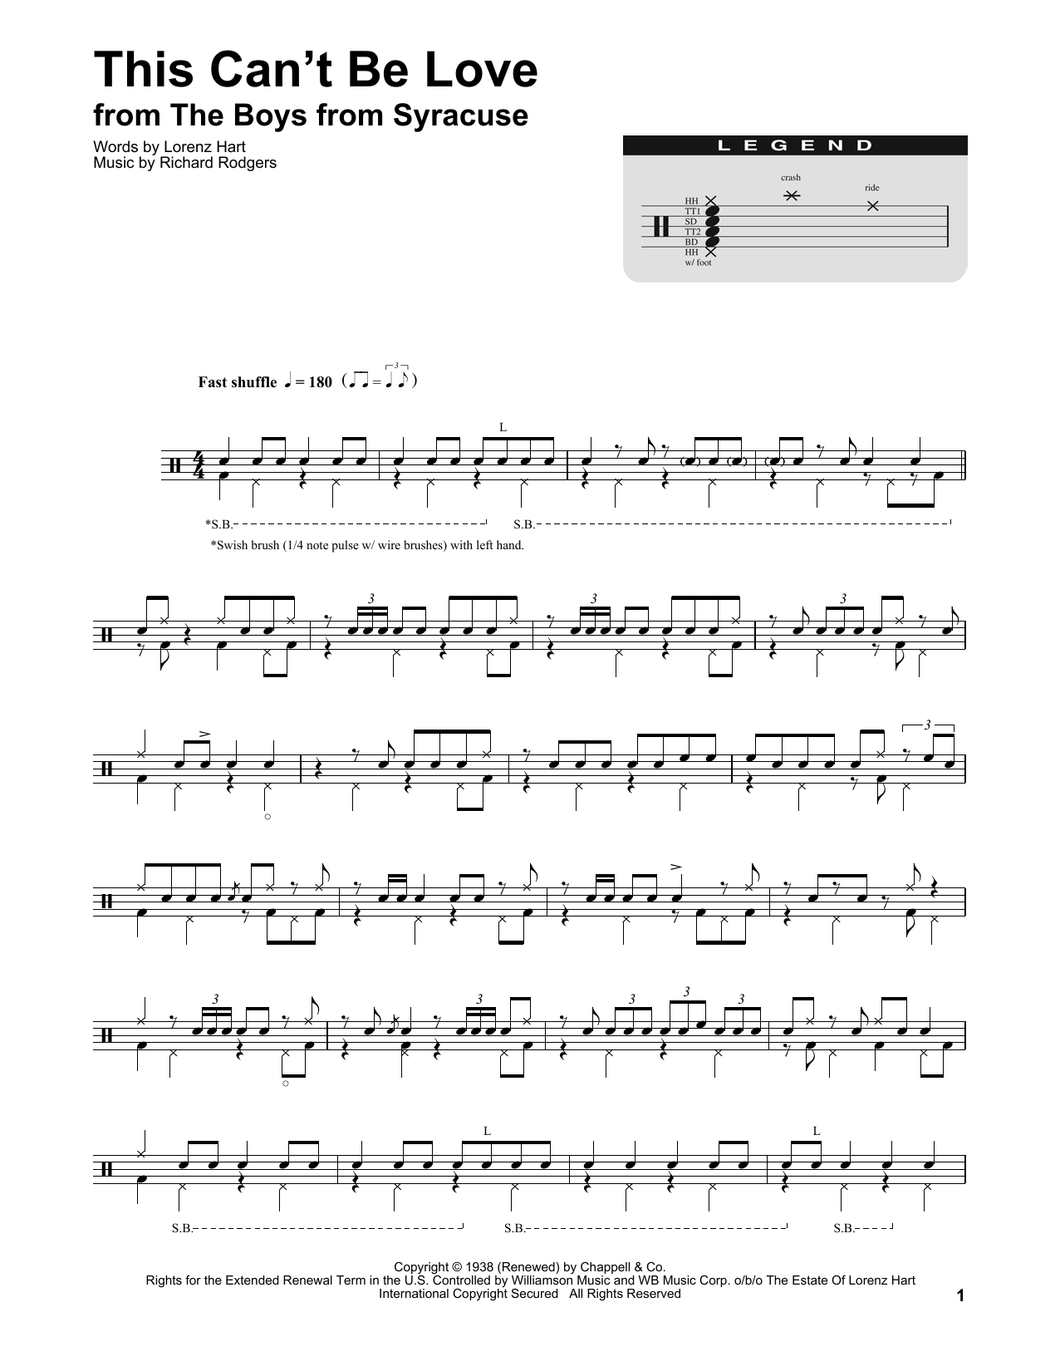 This Can't Be Love - Rodgers & Hart - Full Drum Transcription / Drum Sheet Music - SheetMusicDirect DT